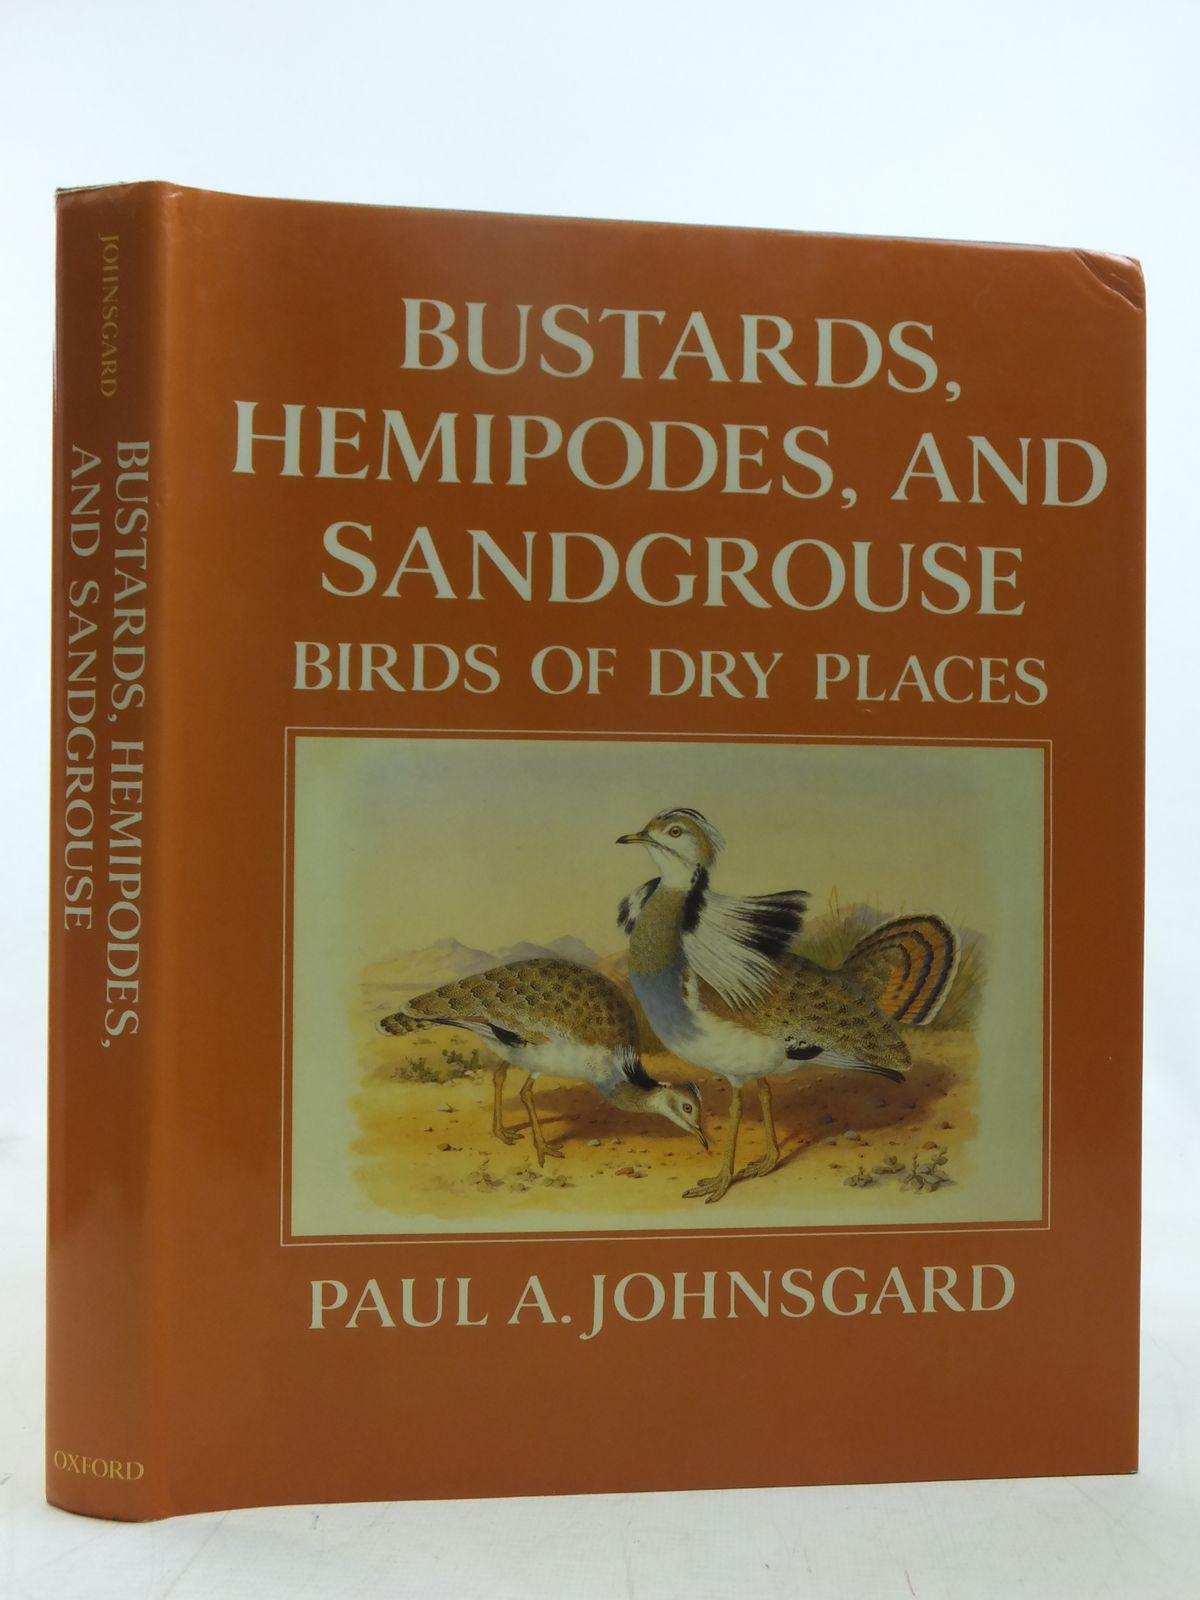 Photo of BUSTARDS, HEMIPODES, AND SANDGROUSE: BIRDS OF DRY PLACES written by Johnsgard, Paul A. illustrated by Jones, Henry published by Oxford University Press (STOCK CODE: 1607493)  for sale by Stella & Rose's Books